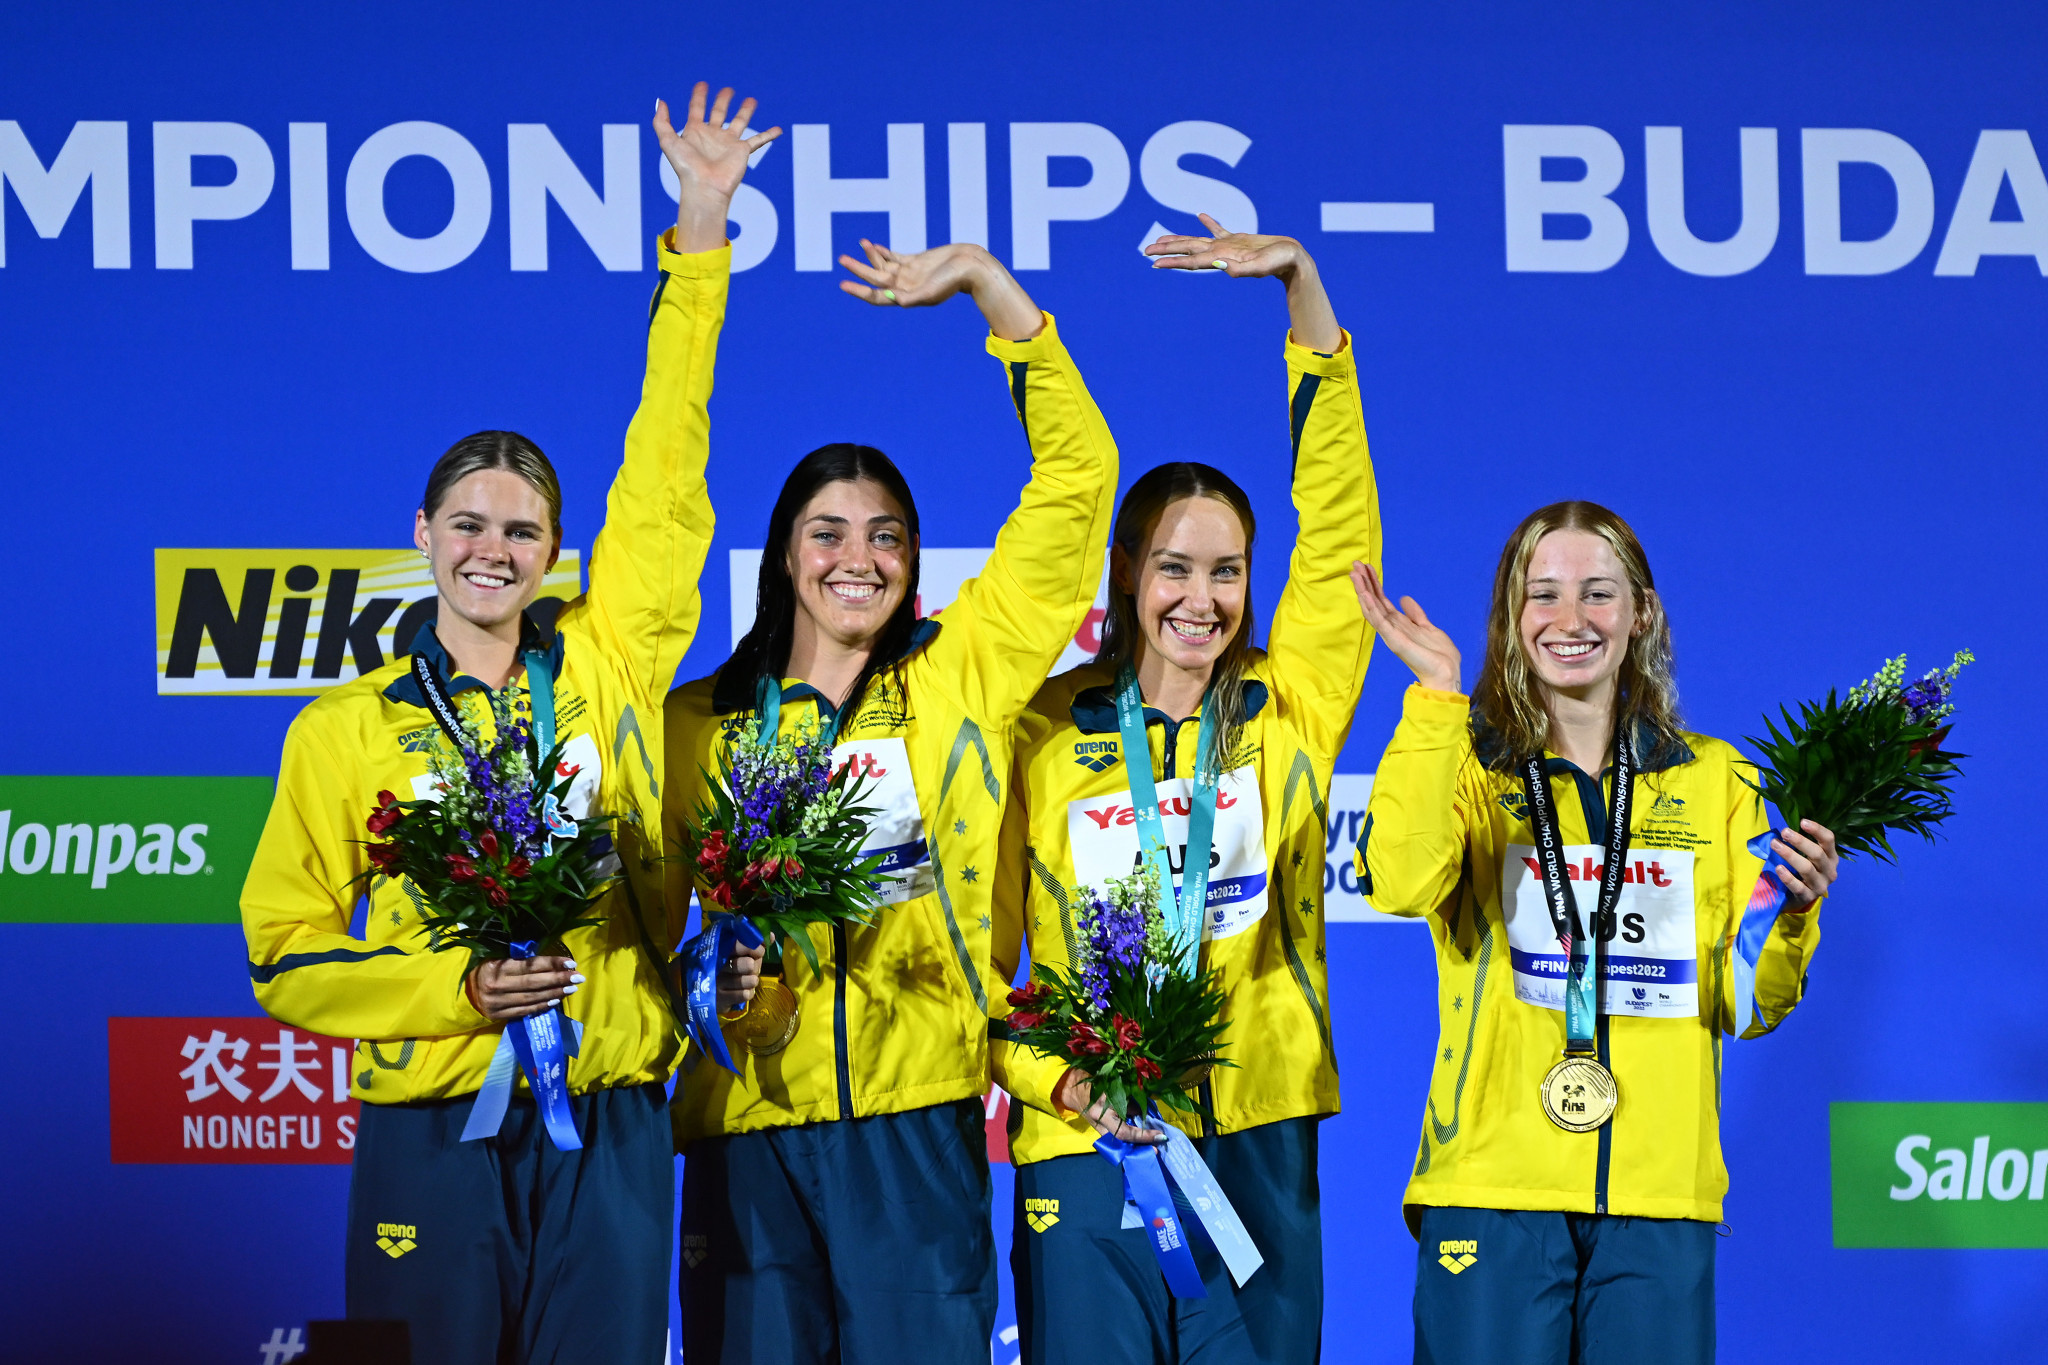 Australia claimed women's 4x100m freestyle relay gold courtesy of Shayna Jack, furthest left, Meg Harris, second left, Madison Wilson, second right, and Mollie O'Callaghan, furthest right ©Getty Images